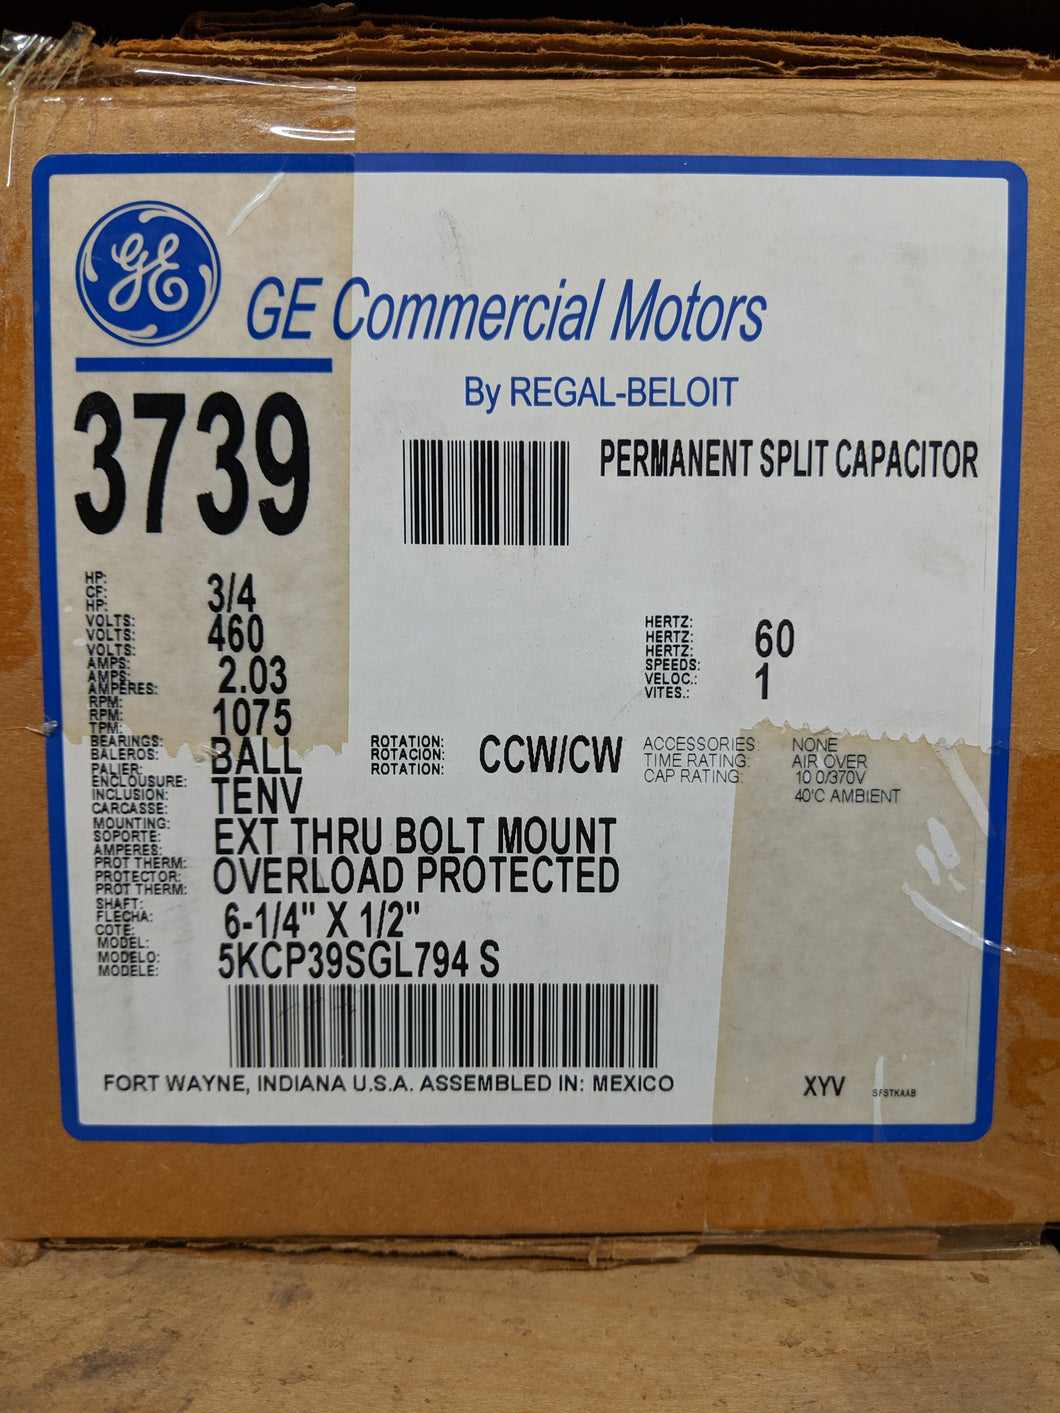 GE 3739, 3/4 HP, 460 Volts, 5KCP39SGL794S